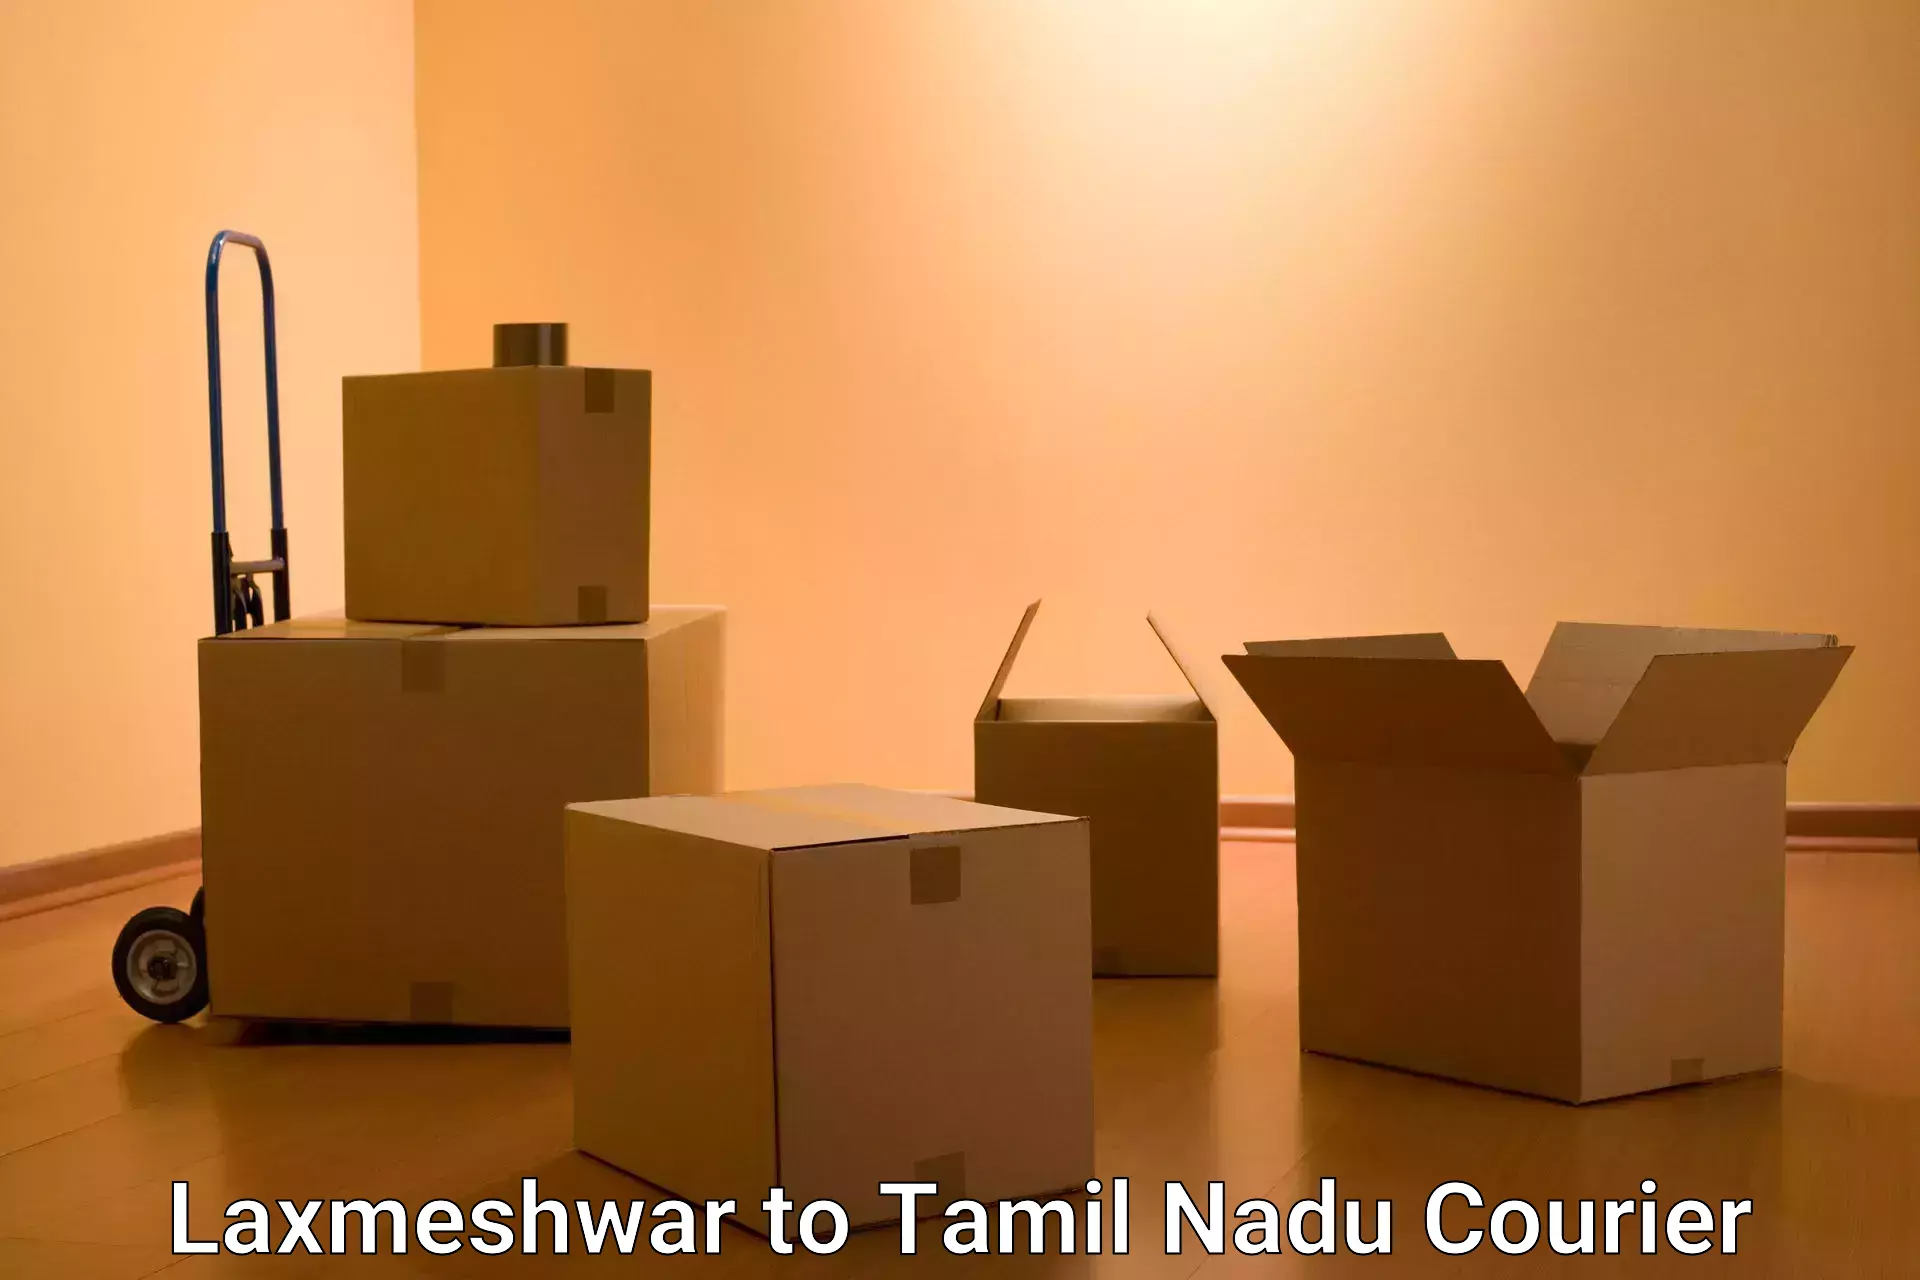 Global courier networks Laxmeshwar to Cuddalore